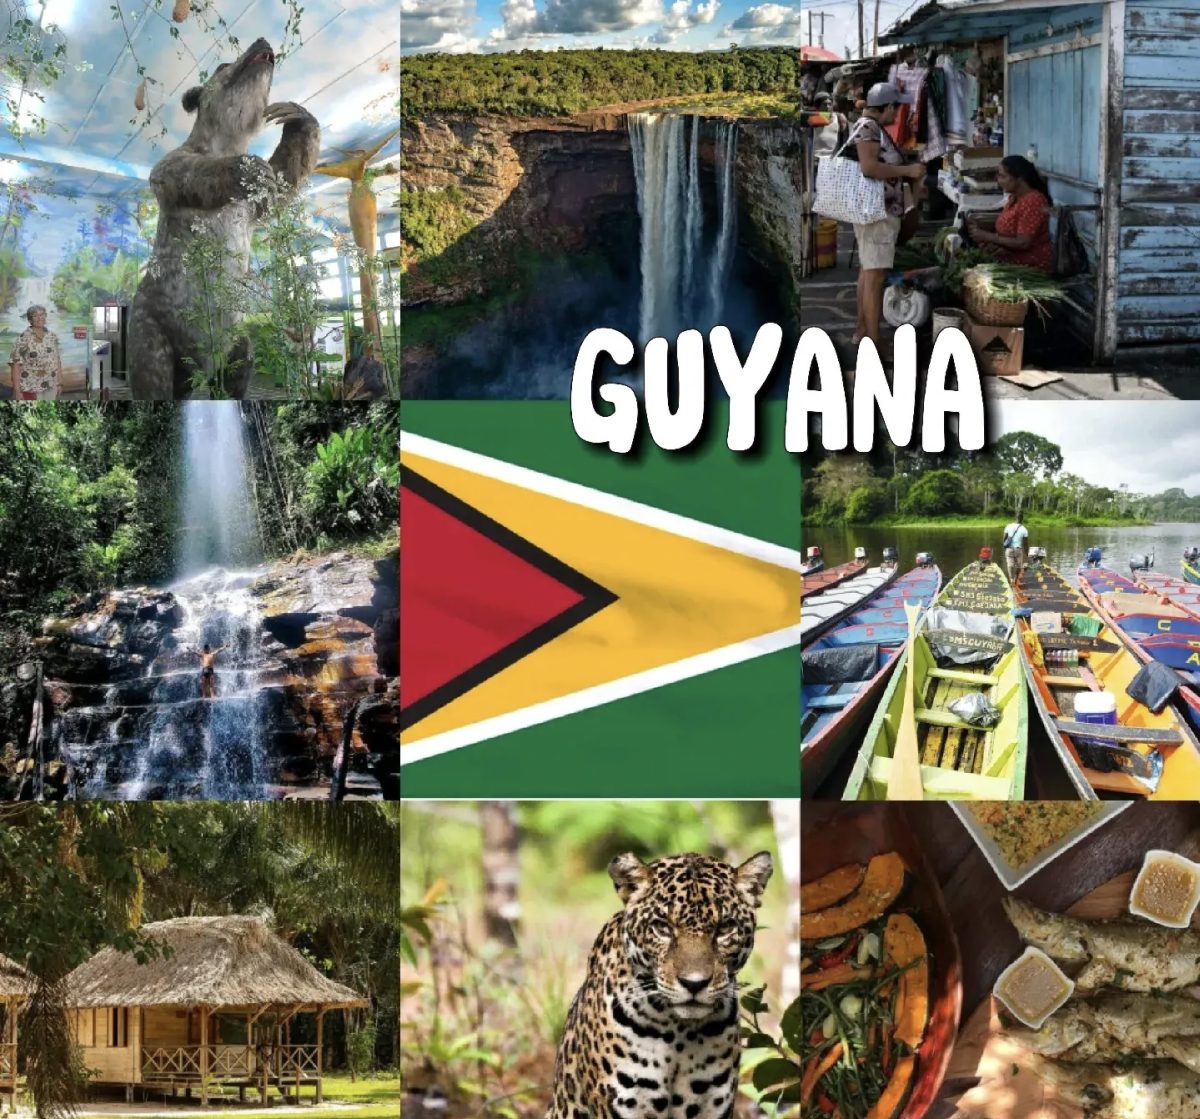 Guyana%3A+A+Melting+Pot+of+Cultures+and+Historical+Narratives